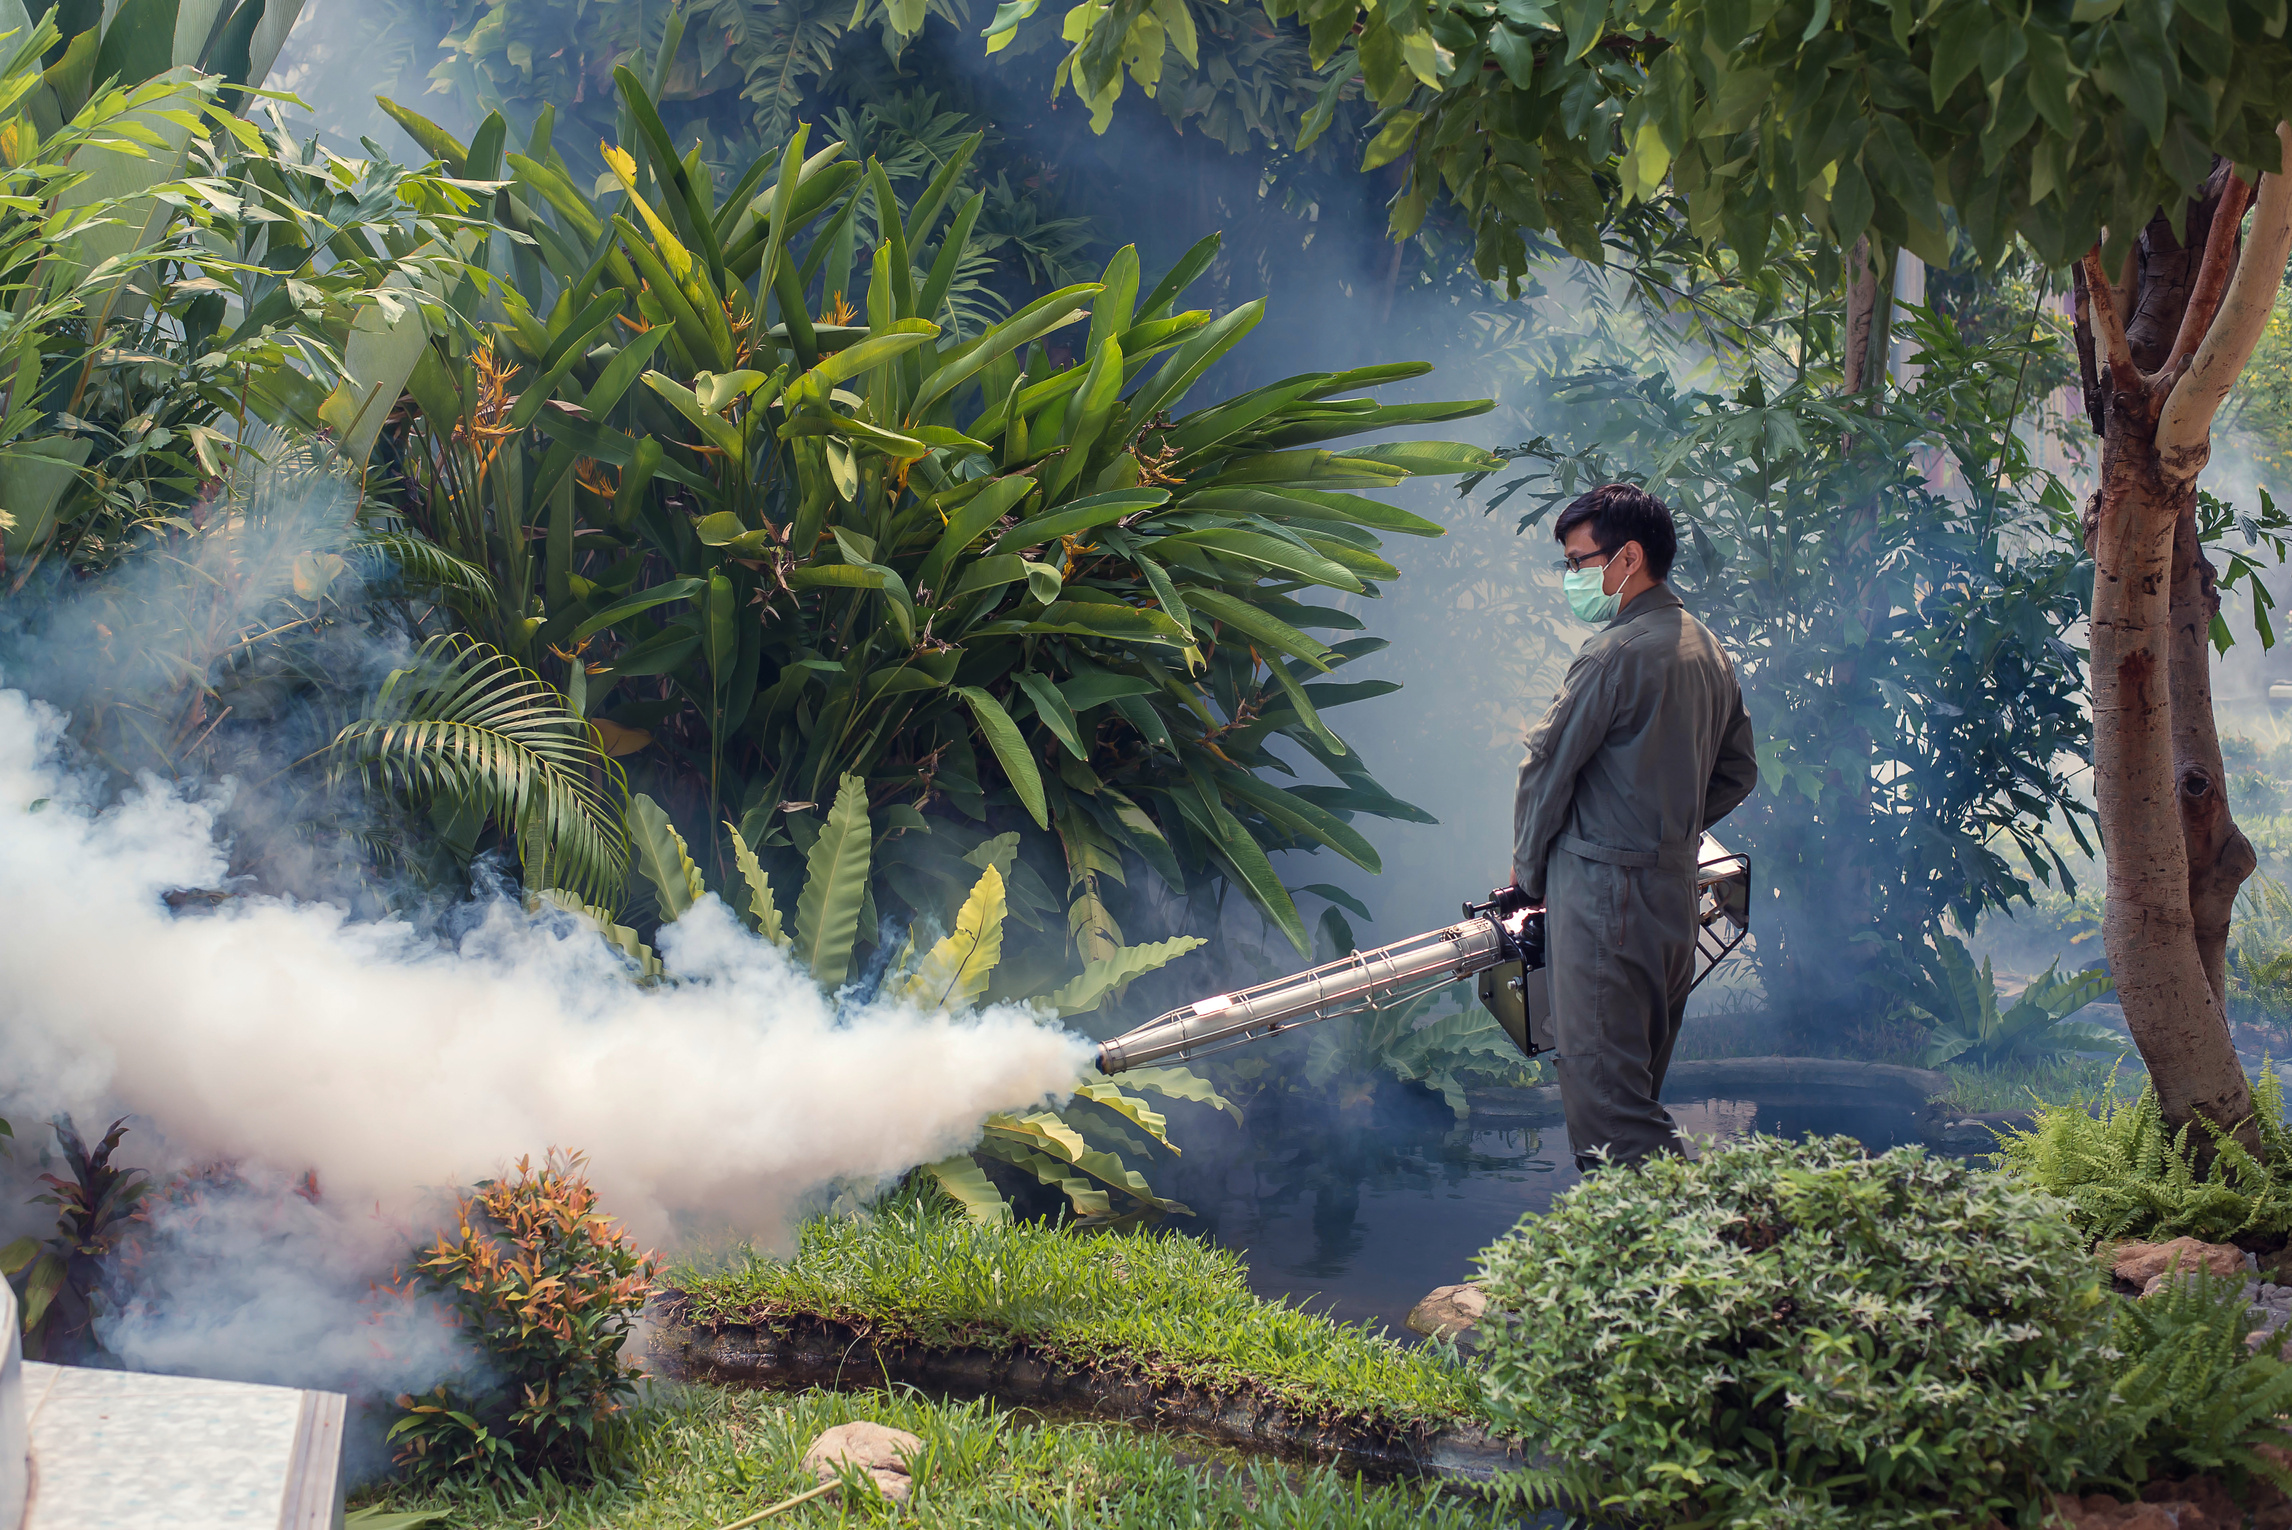 The man fogging to eliminate mosquito